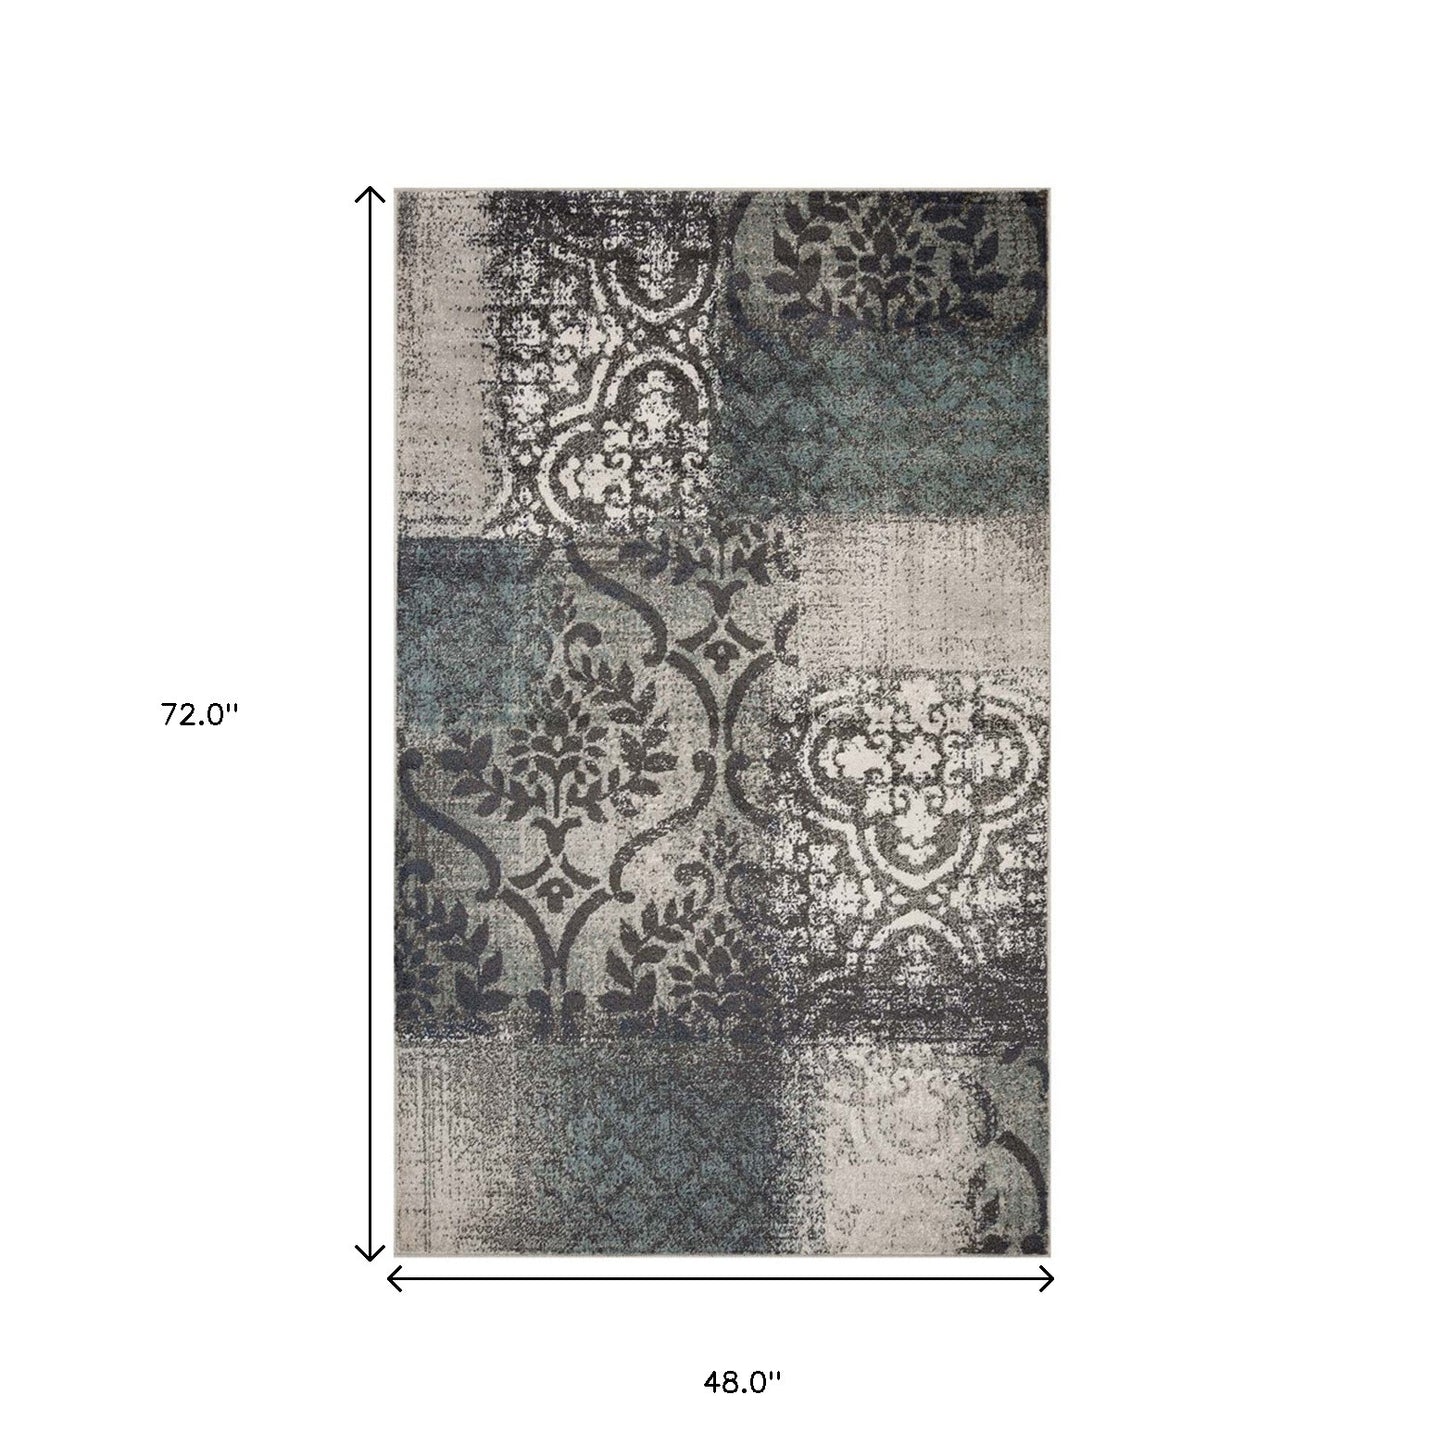 4' X 6' Teal And Gray Damask Distressed Stain Resistant Area Rug